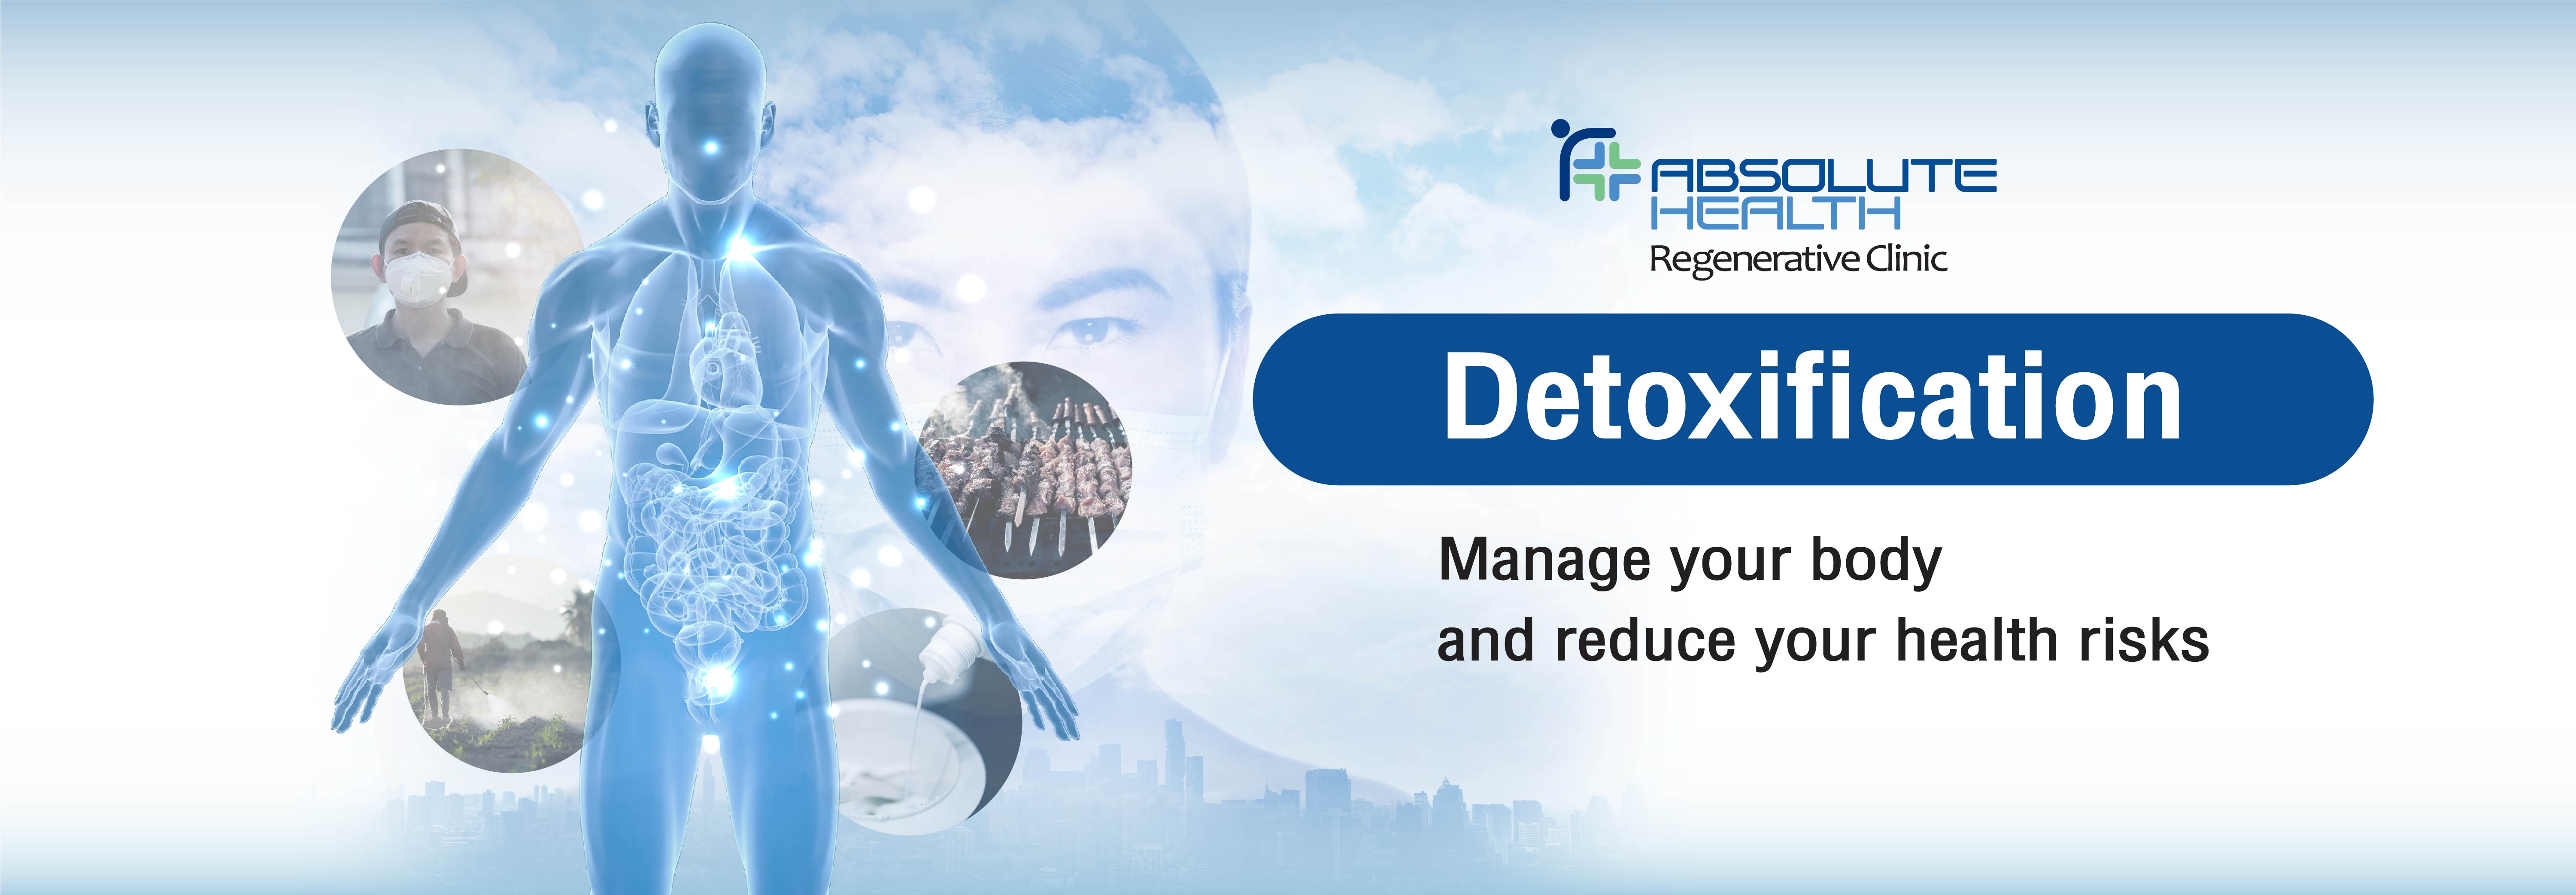 Detoxification - Manage your body and reduce your health risks 